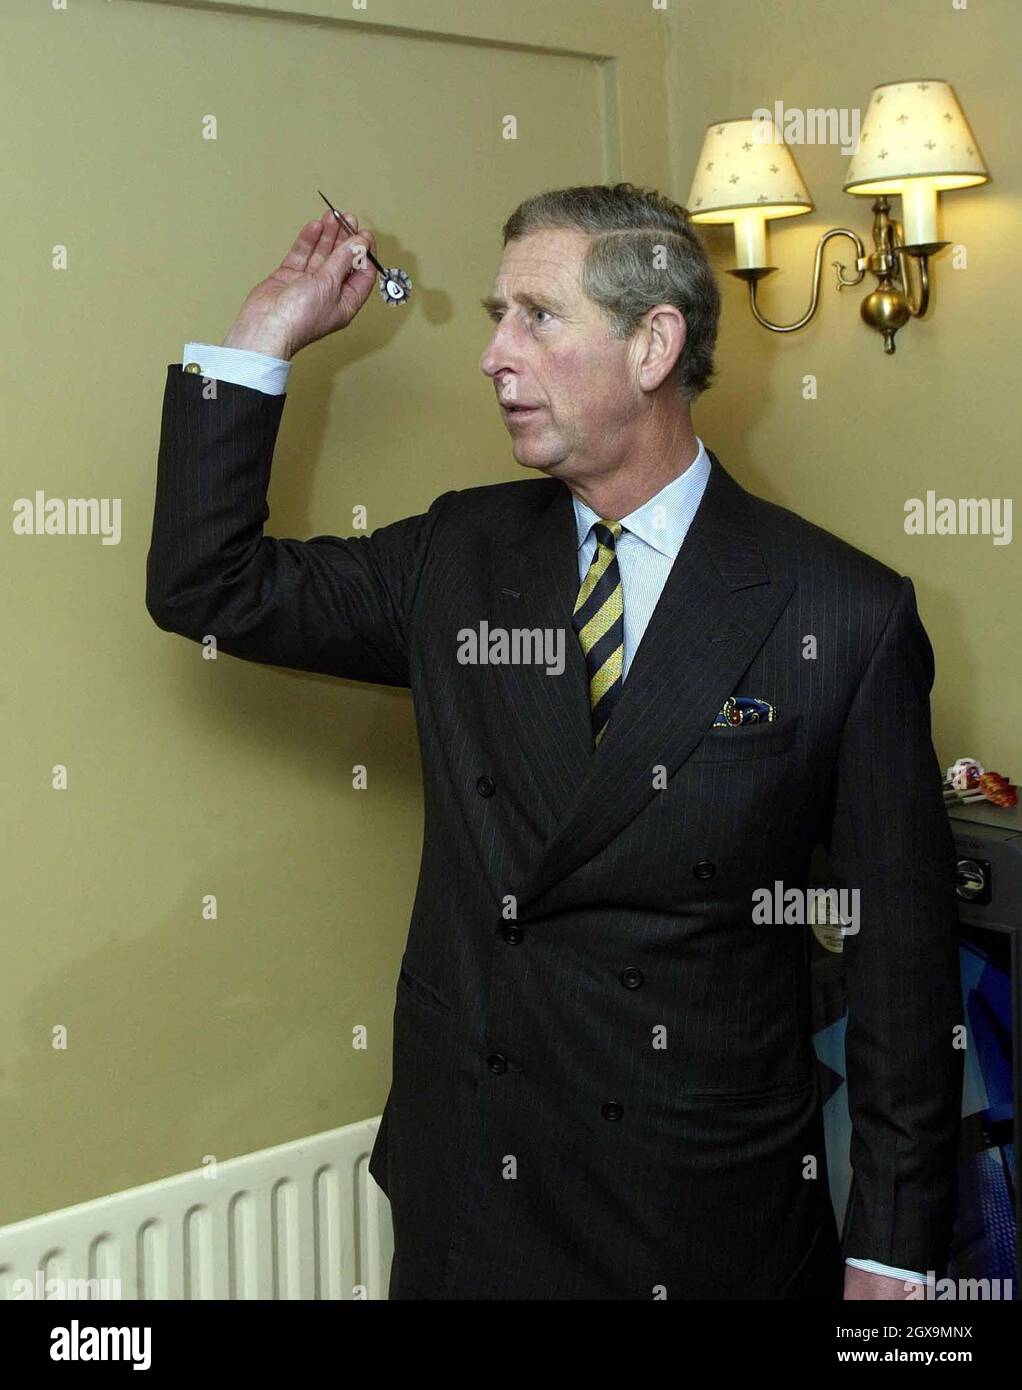 The Prince of Wales enjoyed a sip of a 14-year-old Oban malt whisky during a visit to the Dykes End pub in Reach, Cambridgeshire. Prince Charles enjoyed a game of darts and a whisky after popping into a pioneering village pub,  to meet locals who had saved the business from closing.  Â©Anwar Hussein/allactiondigital.com  Stock Photo